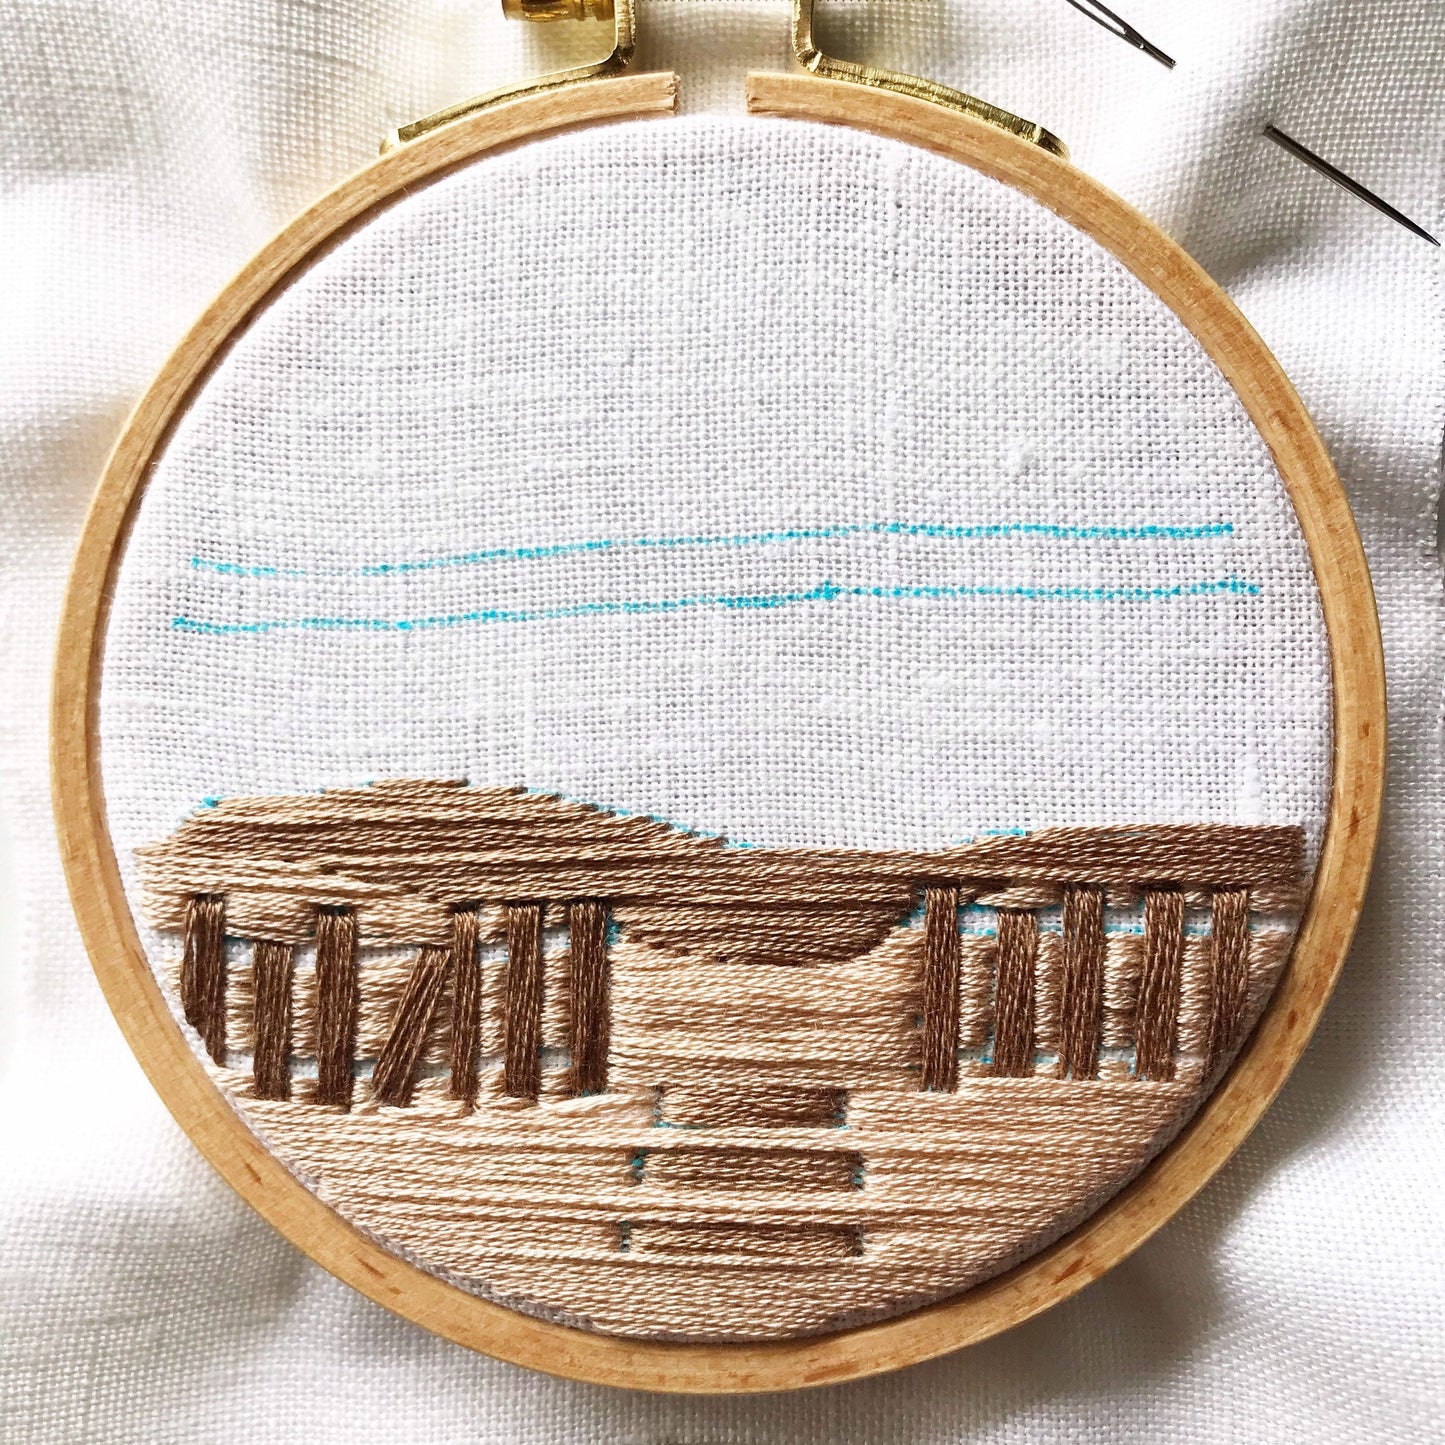 Day at the Beach: Intermediate Embroidery Kit